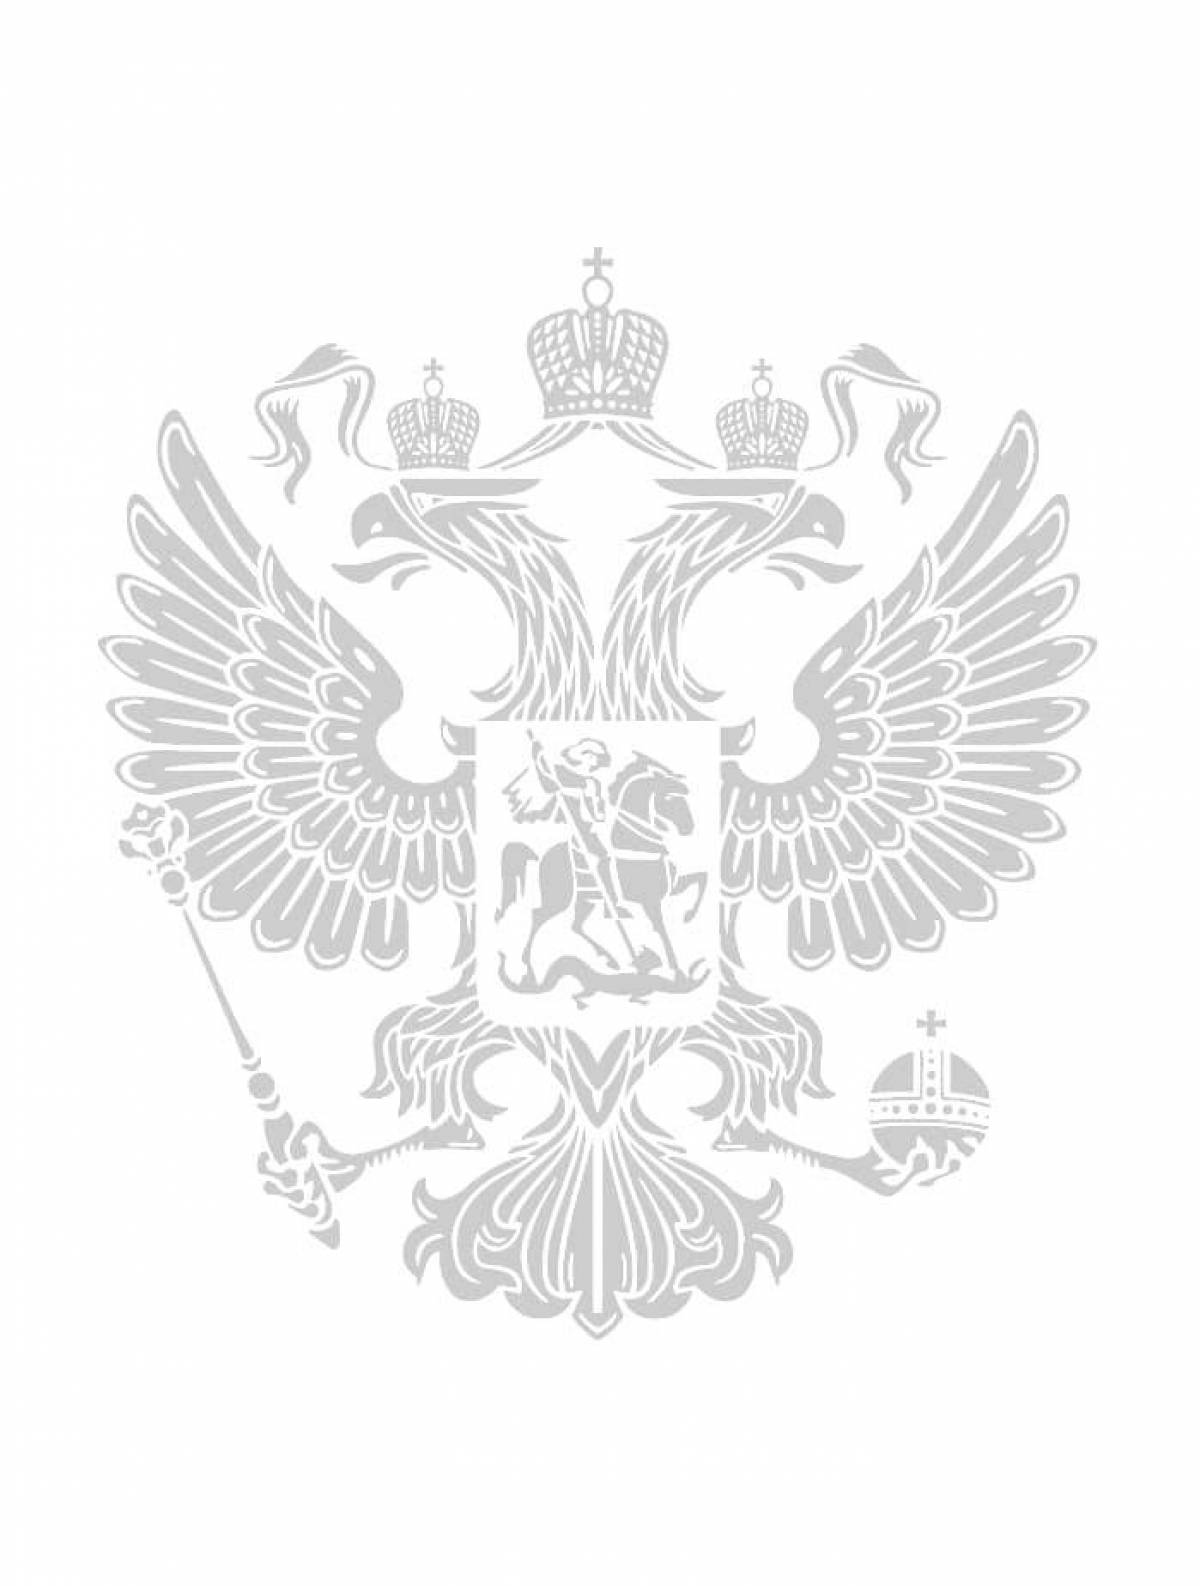 Coat of arms of Russia #8